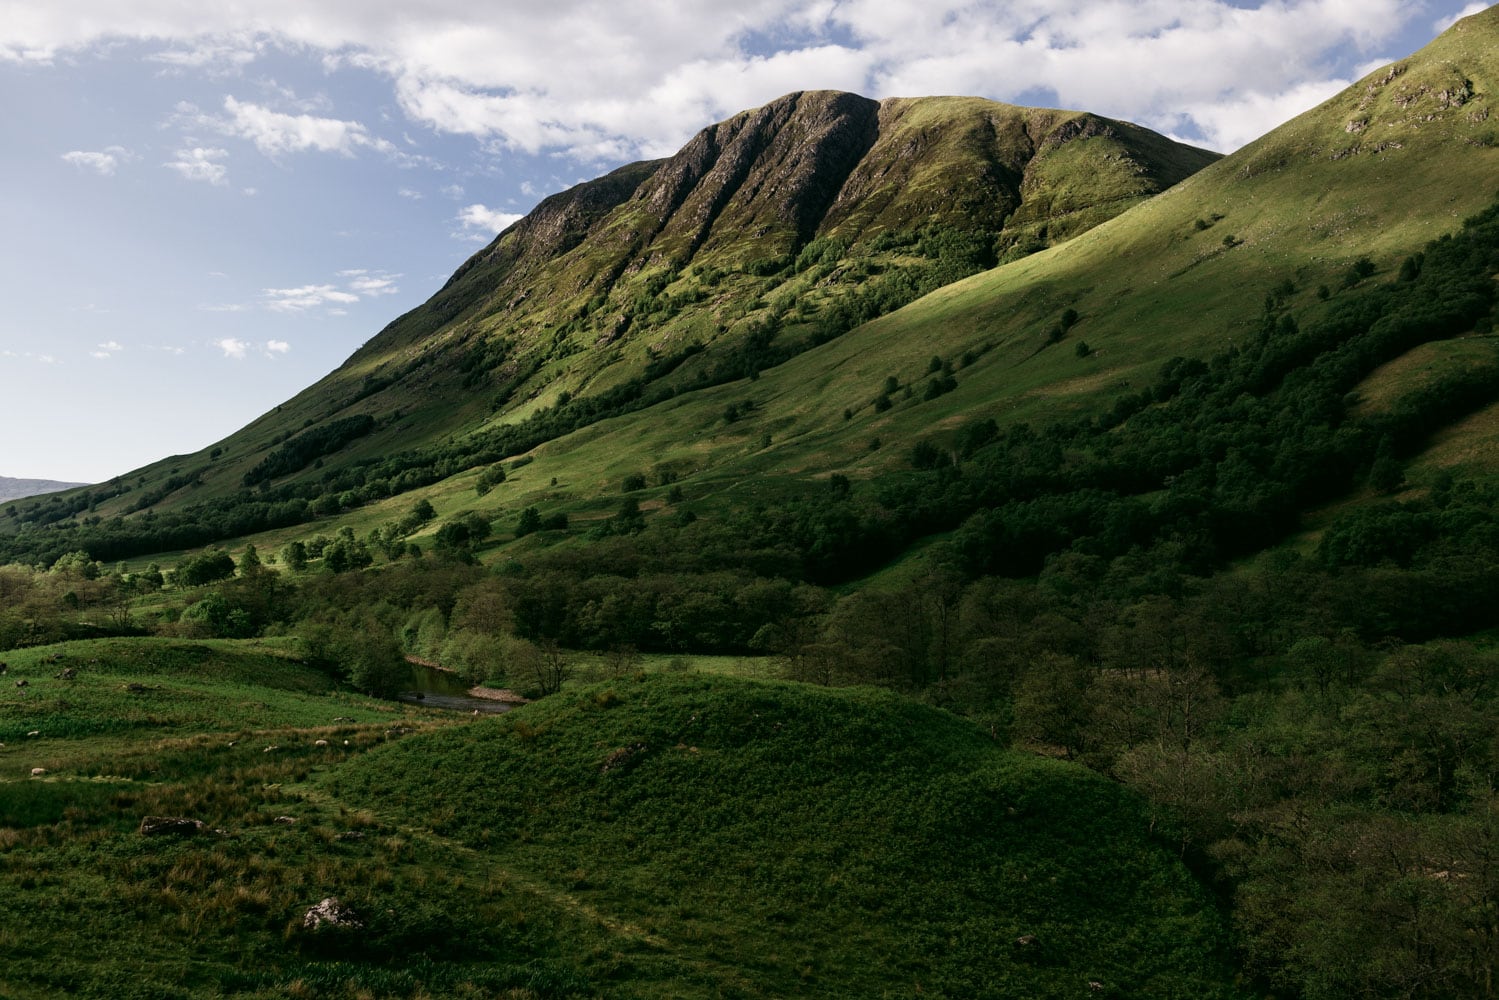 A Glen Nevis elopement in Scotland will be in the same location Braveheart was filmed.